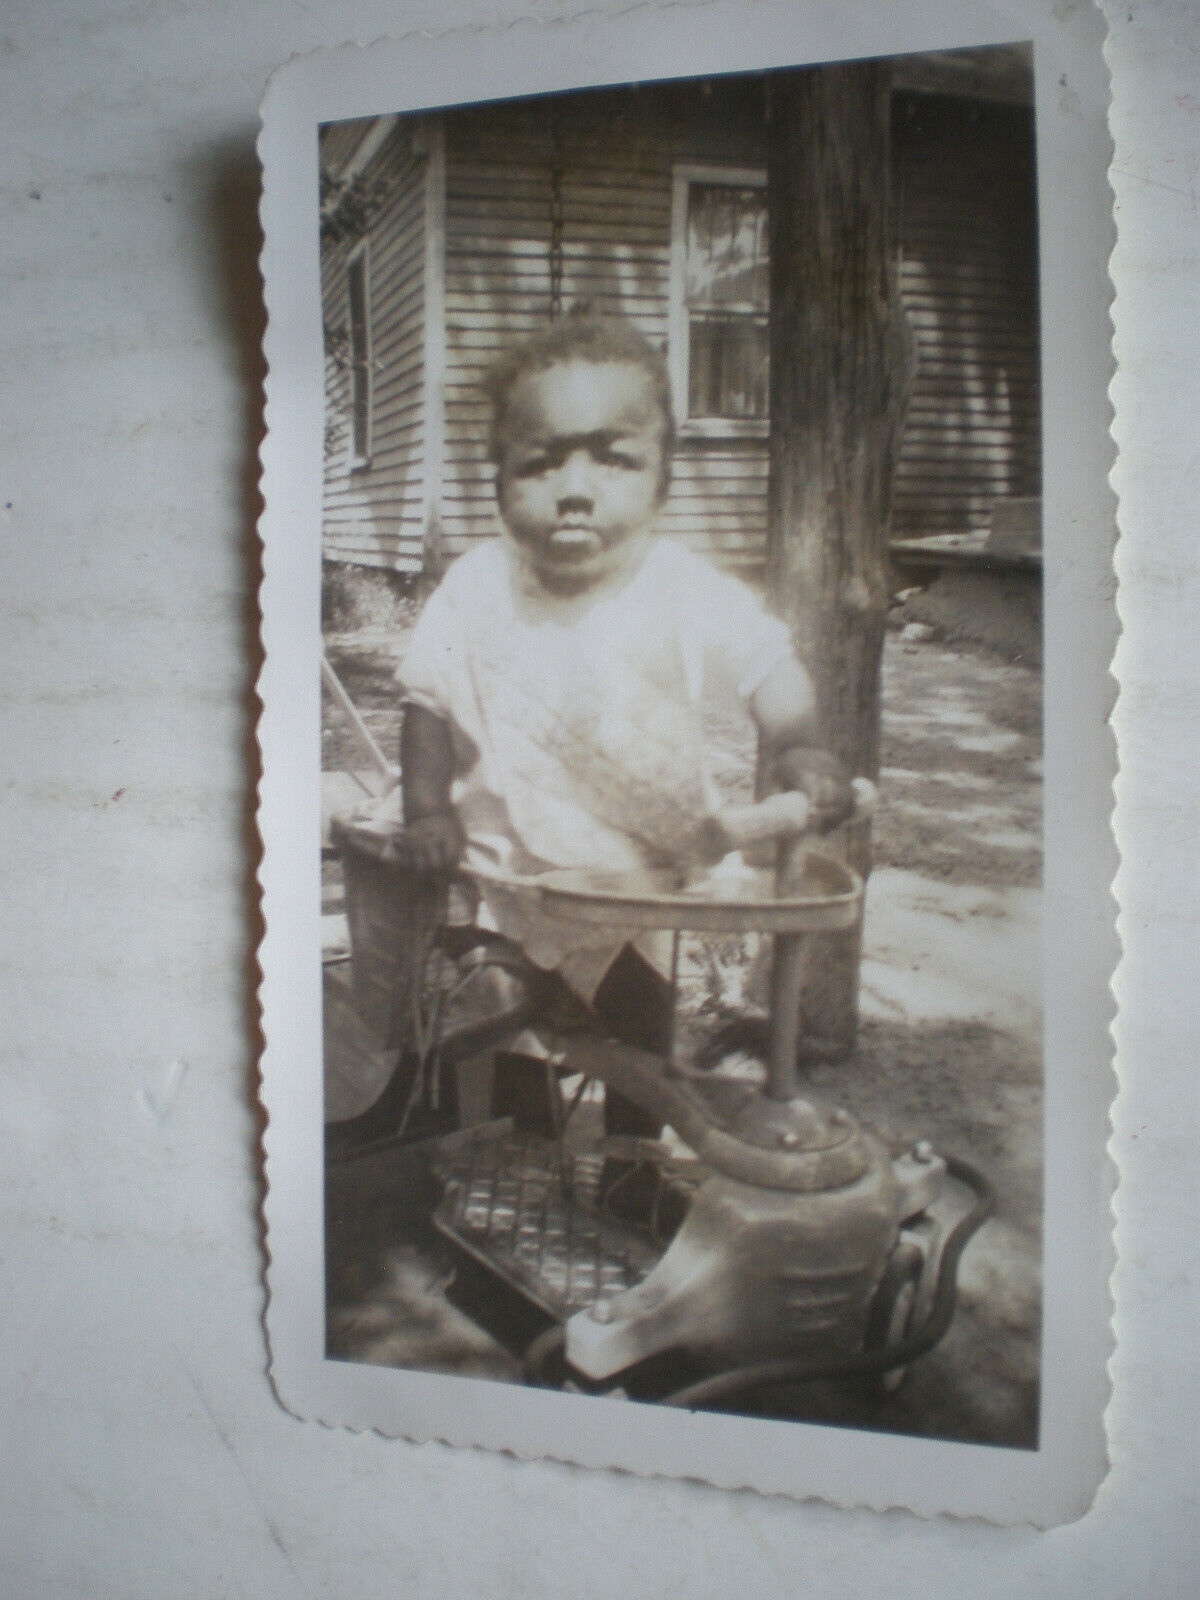 VIntage African American Baby With Vintage Metal Looking Toy Photograph Picture